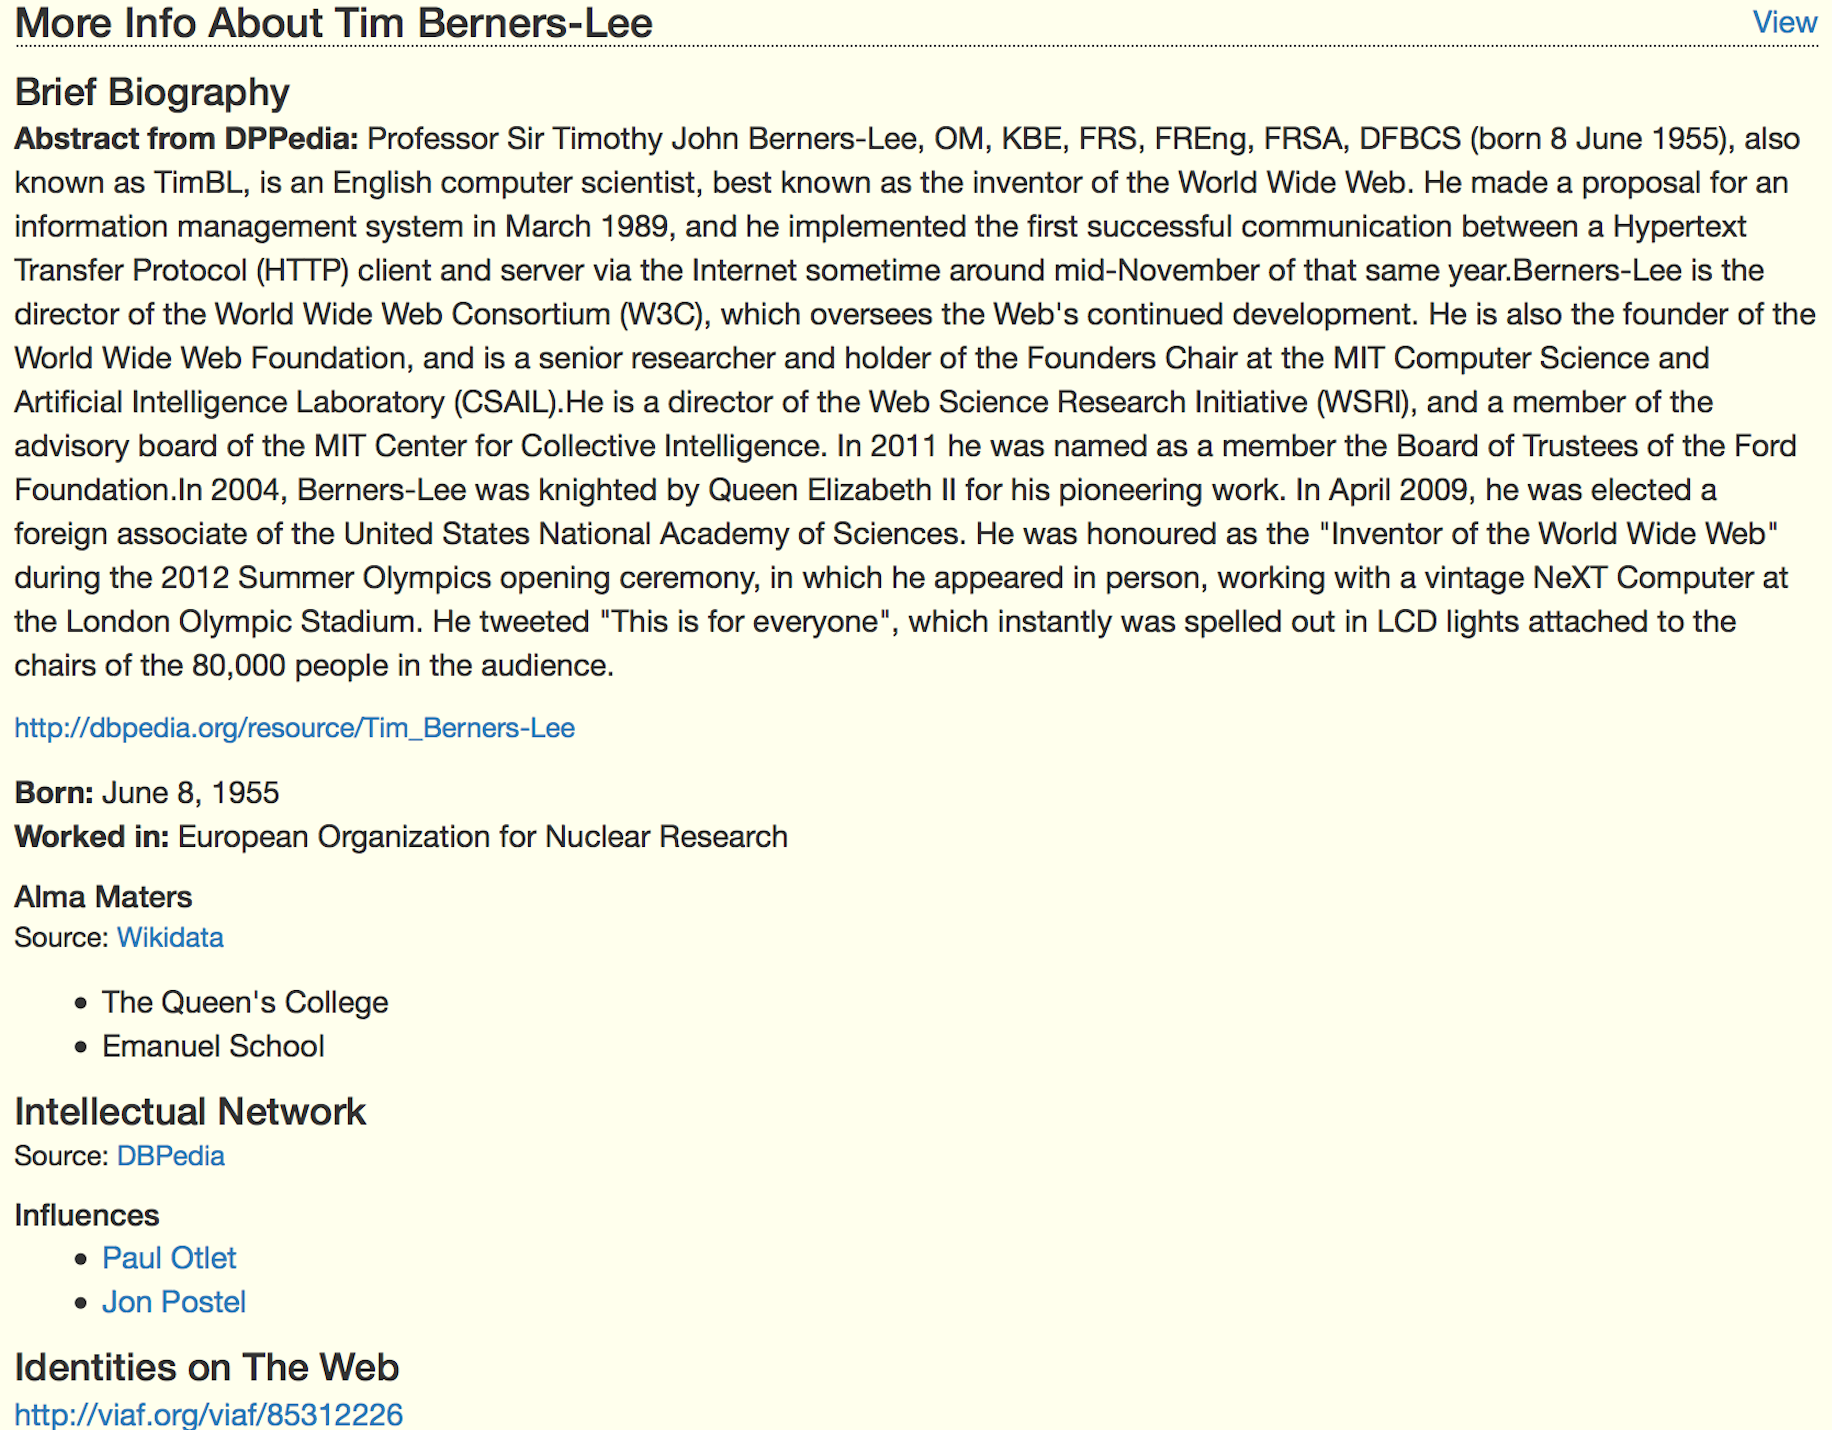 Info card for Tim Berners-Lee